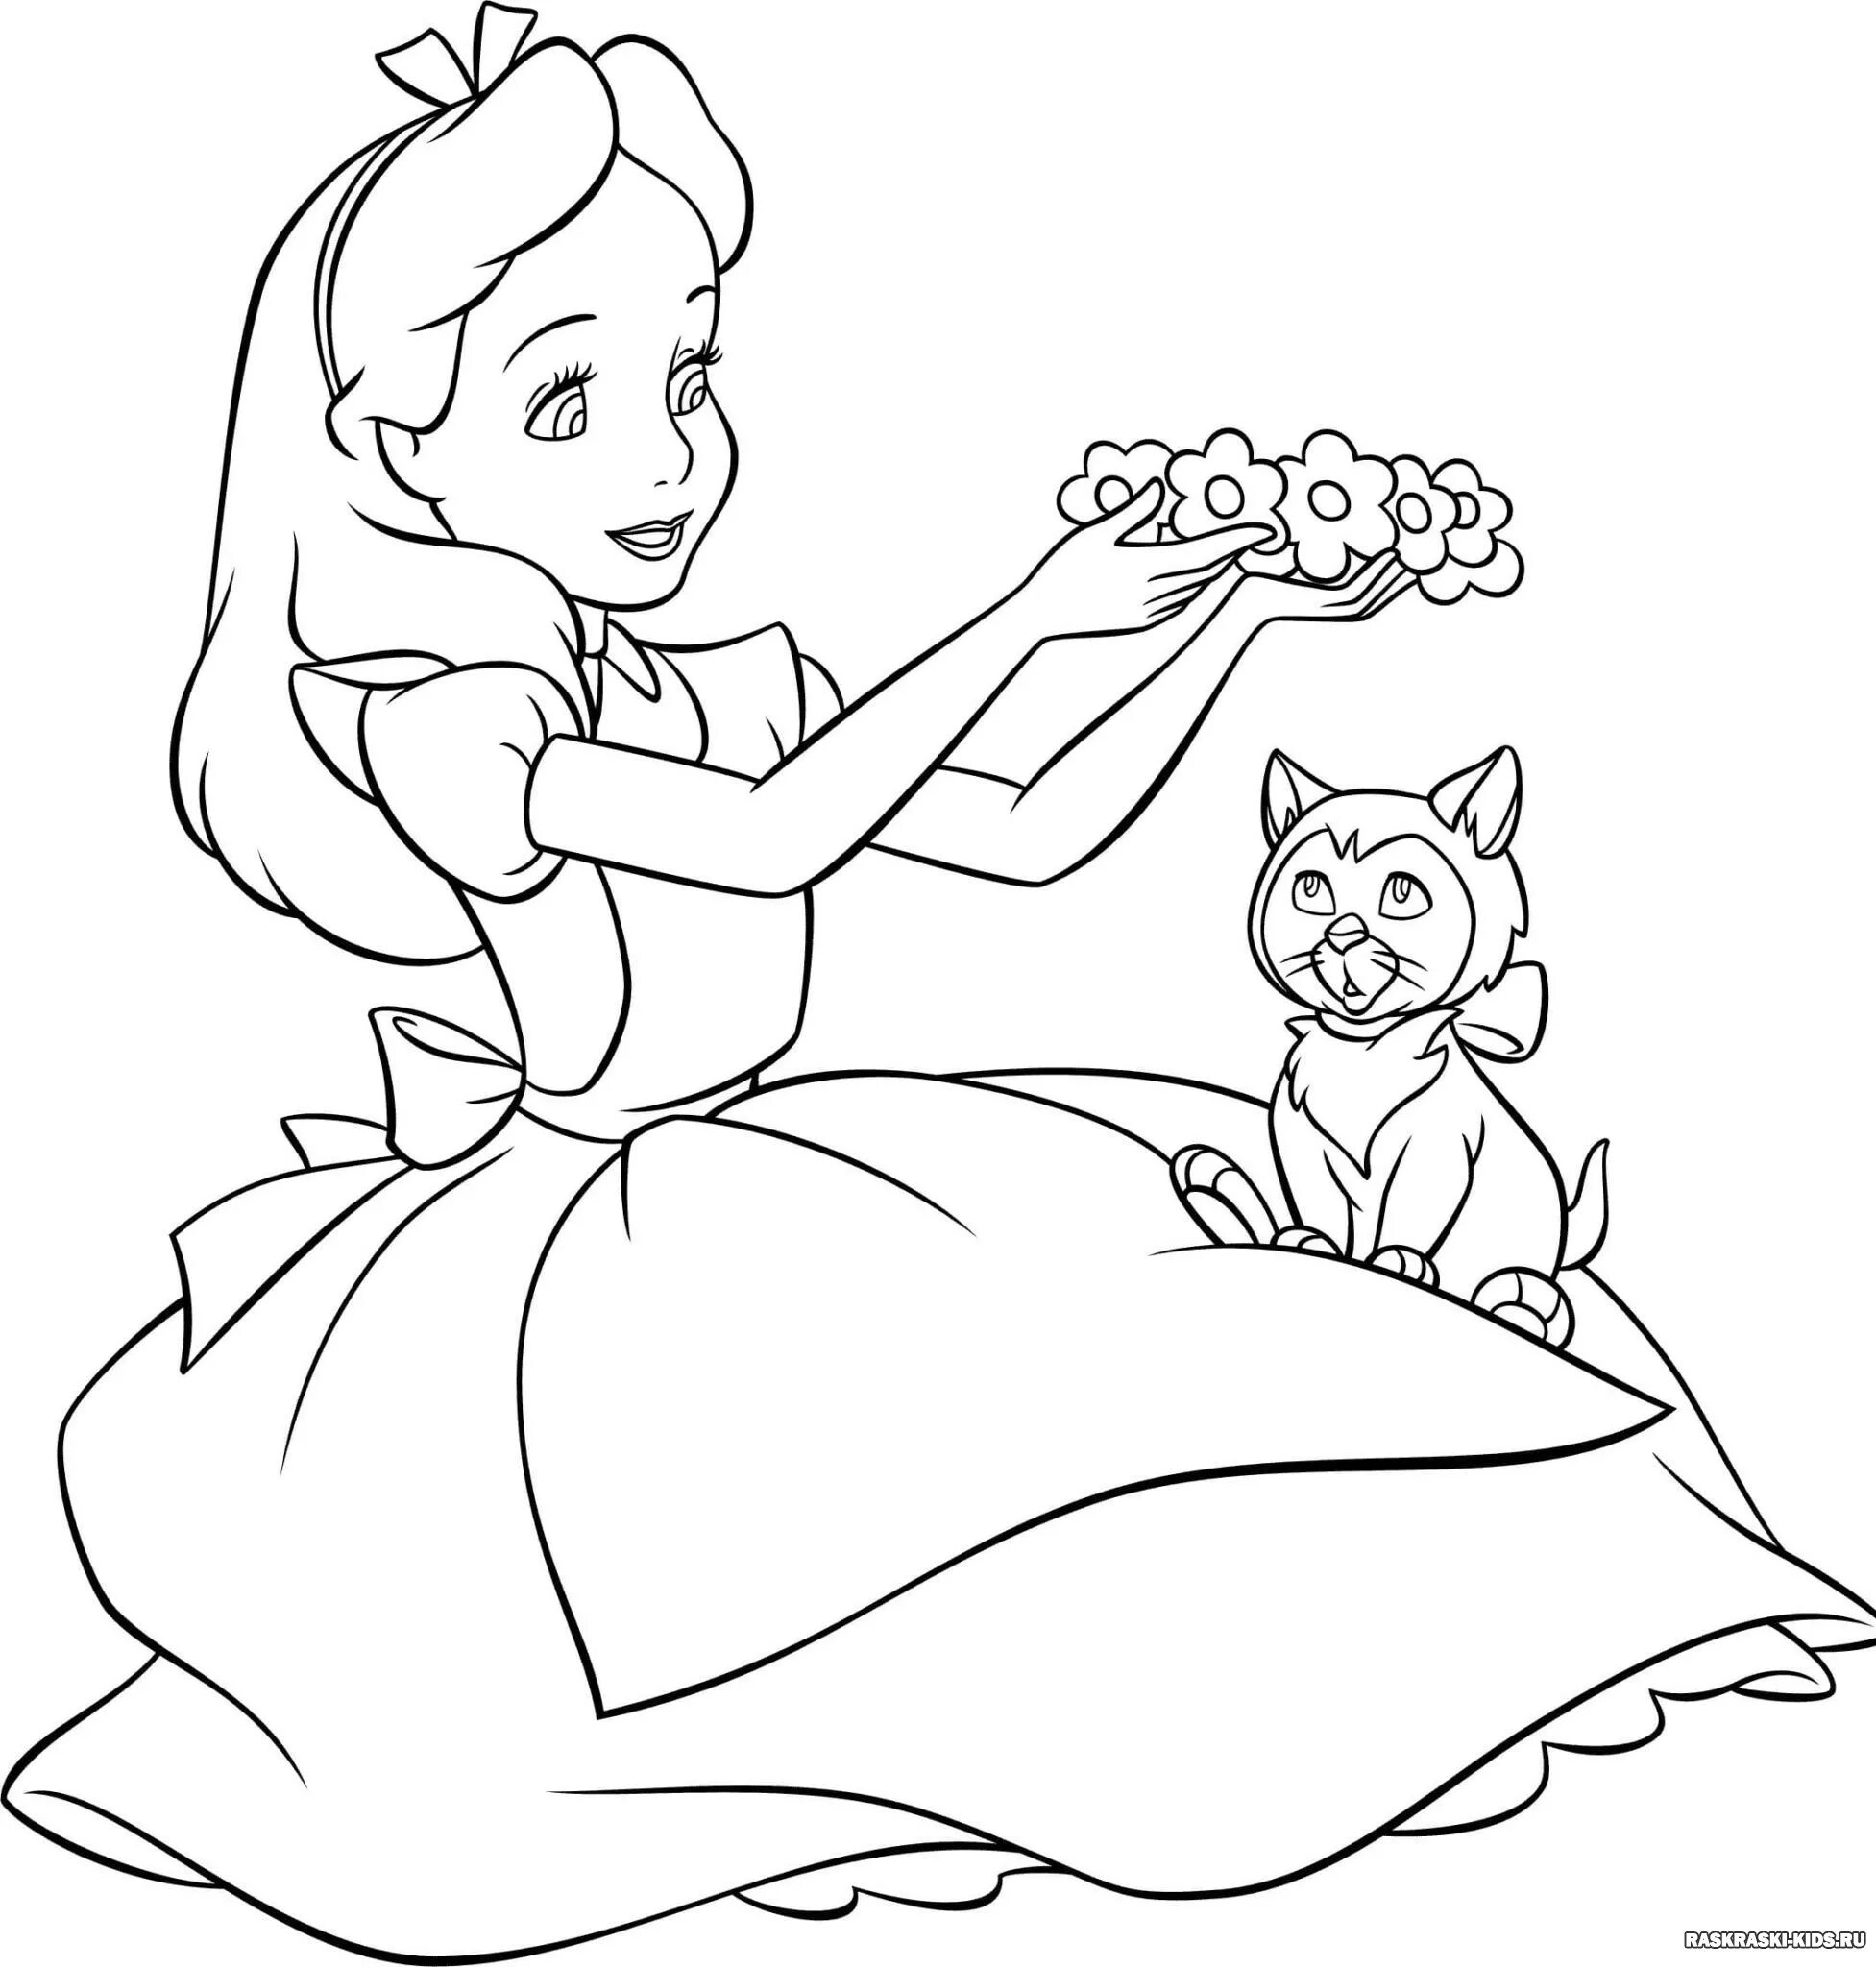 Mysterious alice coloring book